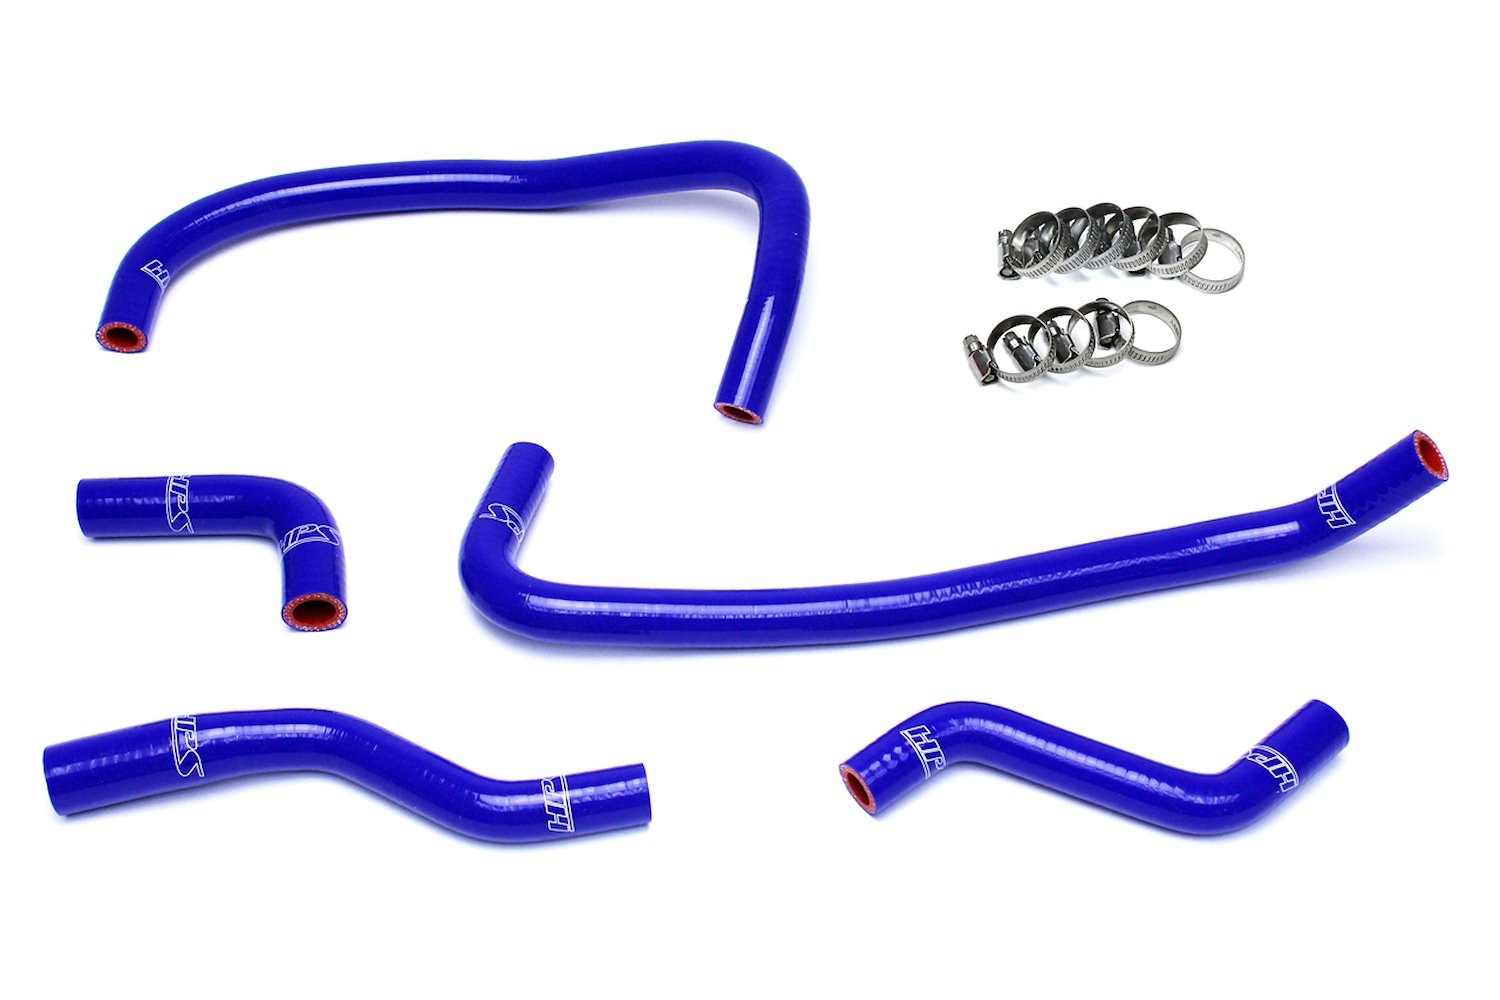 57-1503H-BLUE Heater Hose Kit, High-Temp 3-Ply Reinforced Silicone, Replace OEM Rubber Heater Coolant Hoses